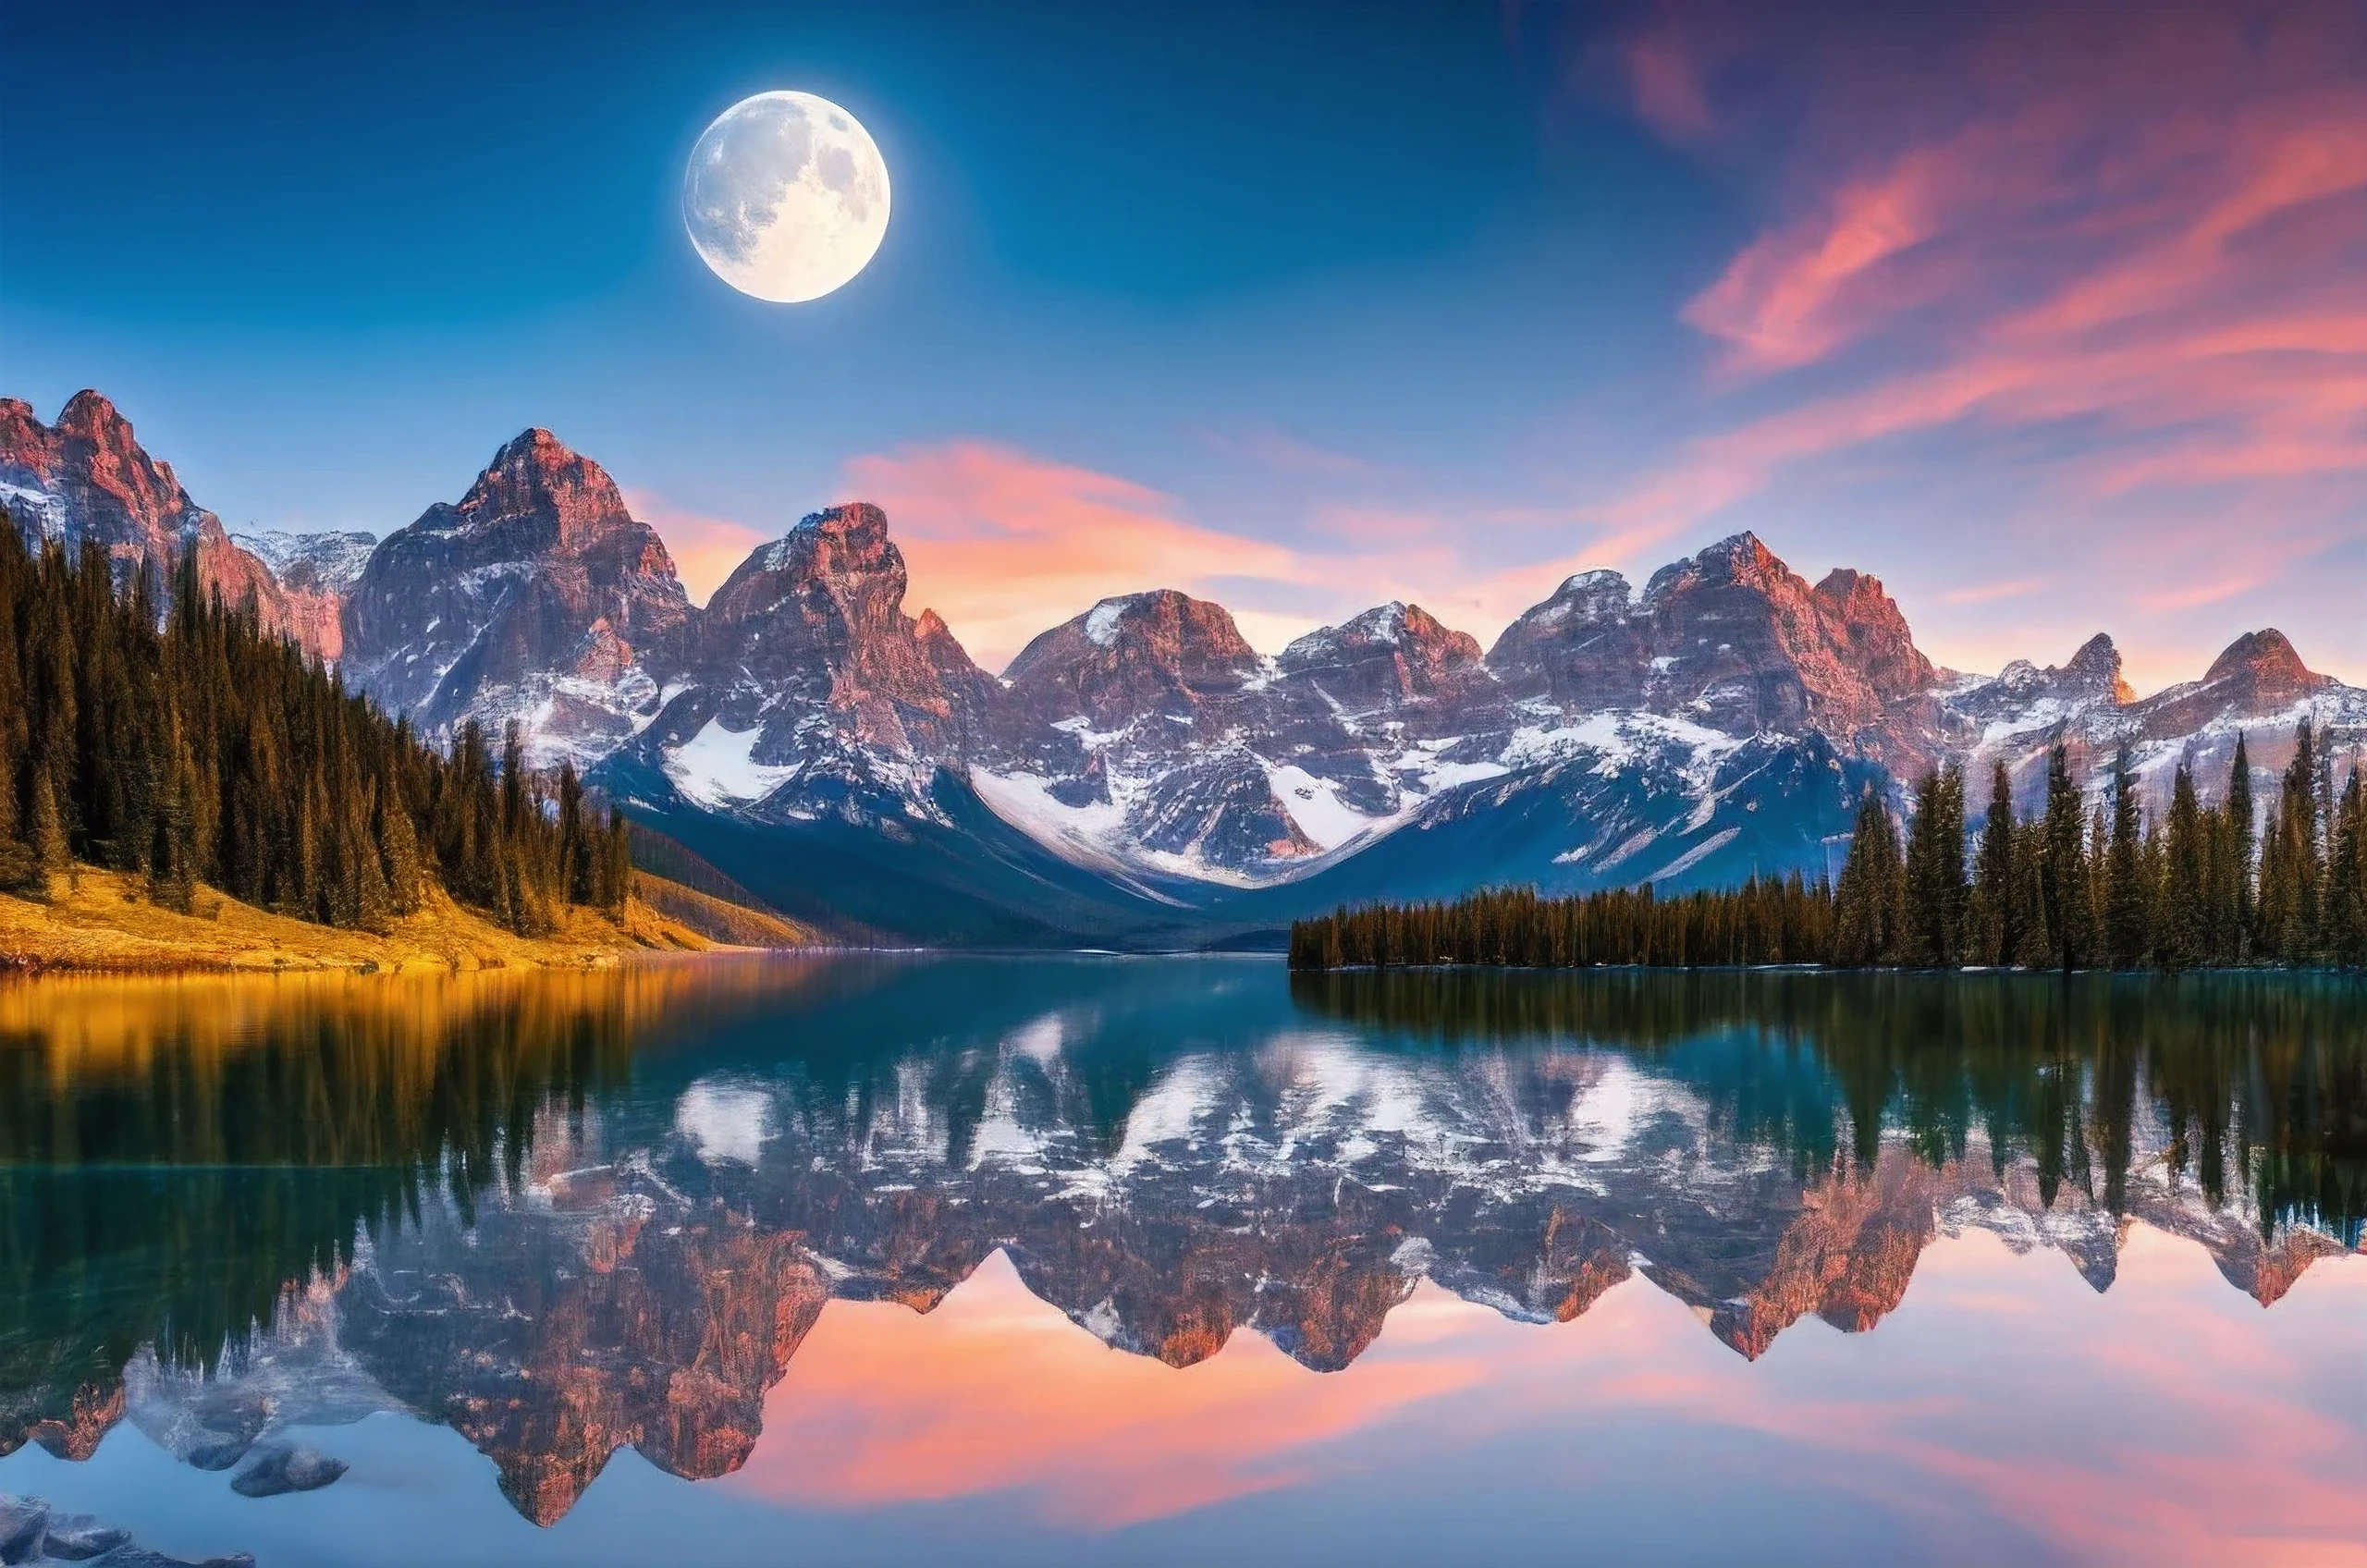 mountains and lake with moon in the sky, Highly detailed 4K digital art, 4K HD wallpapers are very detailed, impressive fantasy landscape, sci-fi fantasy desktop wallpaper, unreal engine 4k wallpaper, Detailed digital art 4k, Sci-fi fantasy wallpaper, Epic fairytale fantasy landscape, 4k HD matte digital painting, Stunning 8K images